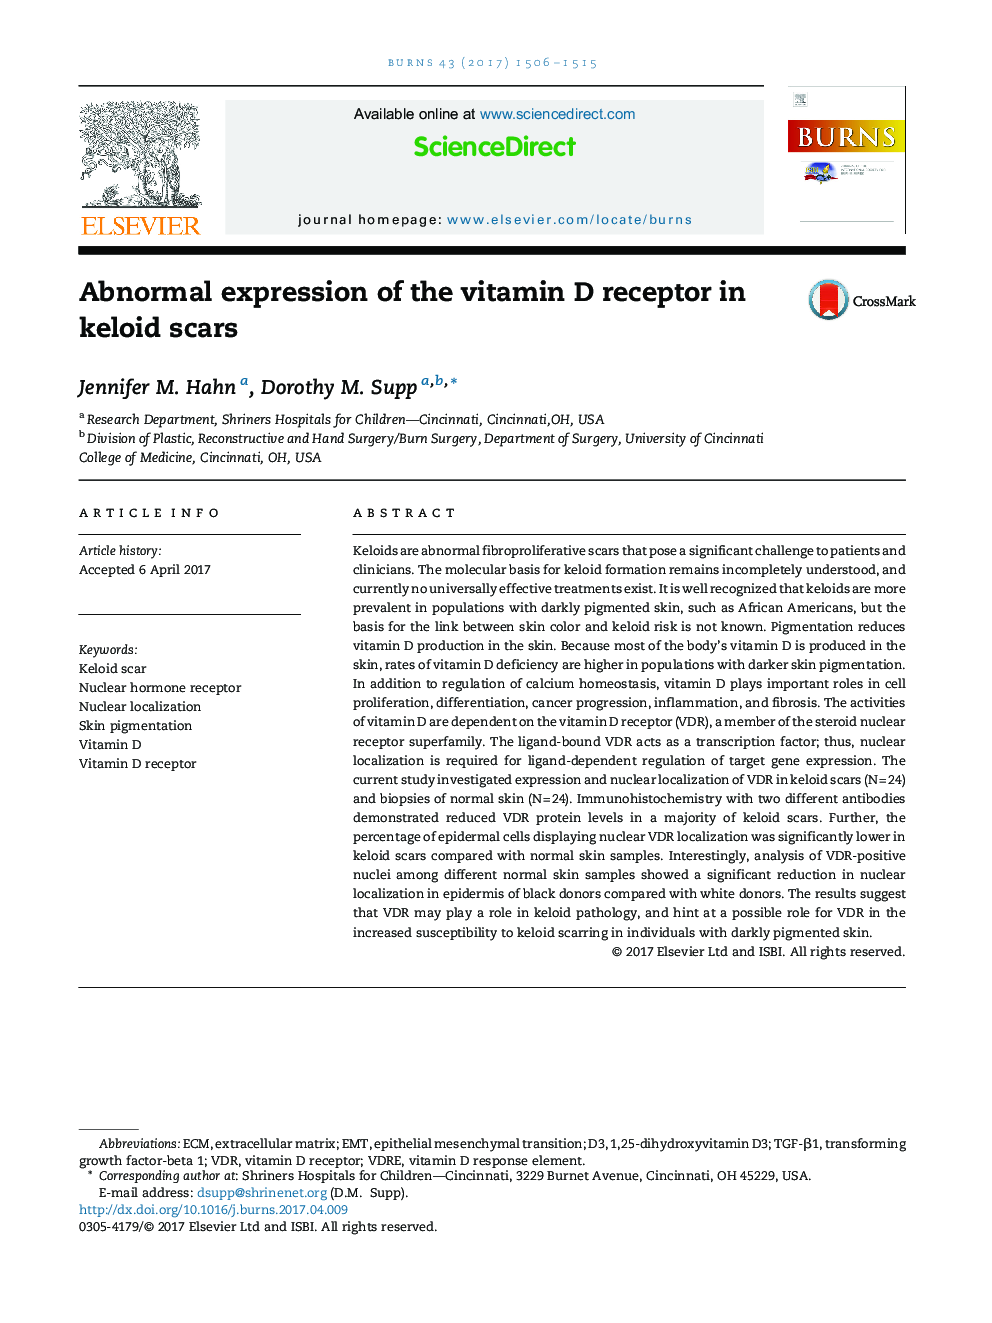 Abnormal expression of the vitamin D receptor in keloid scars